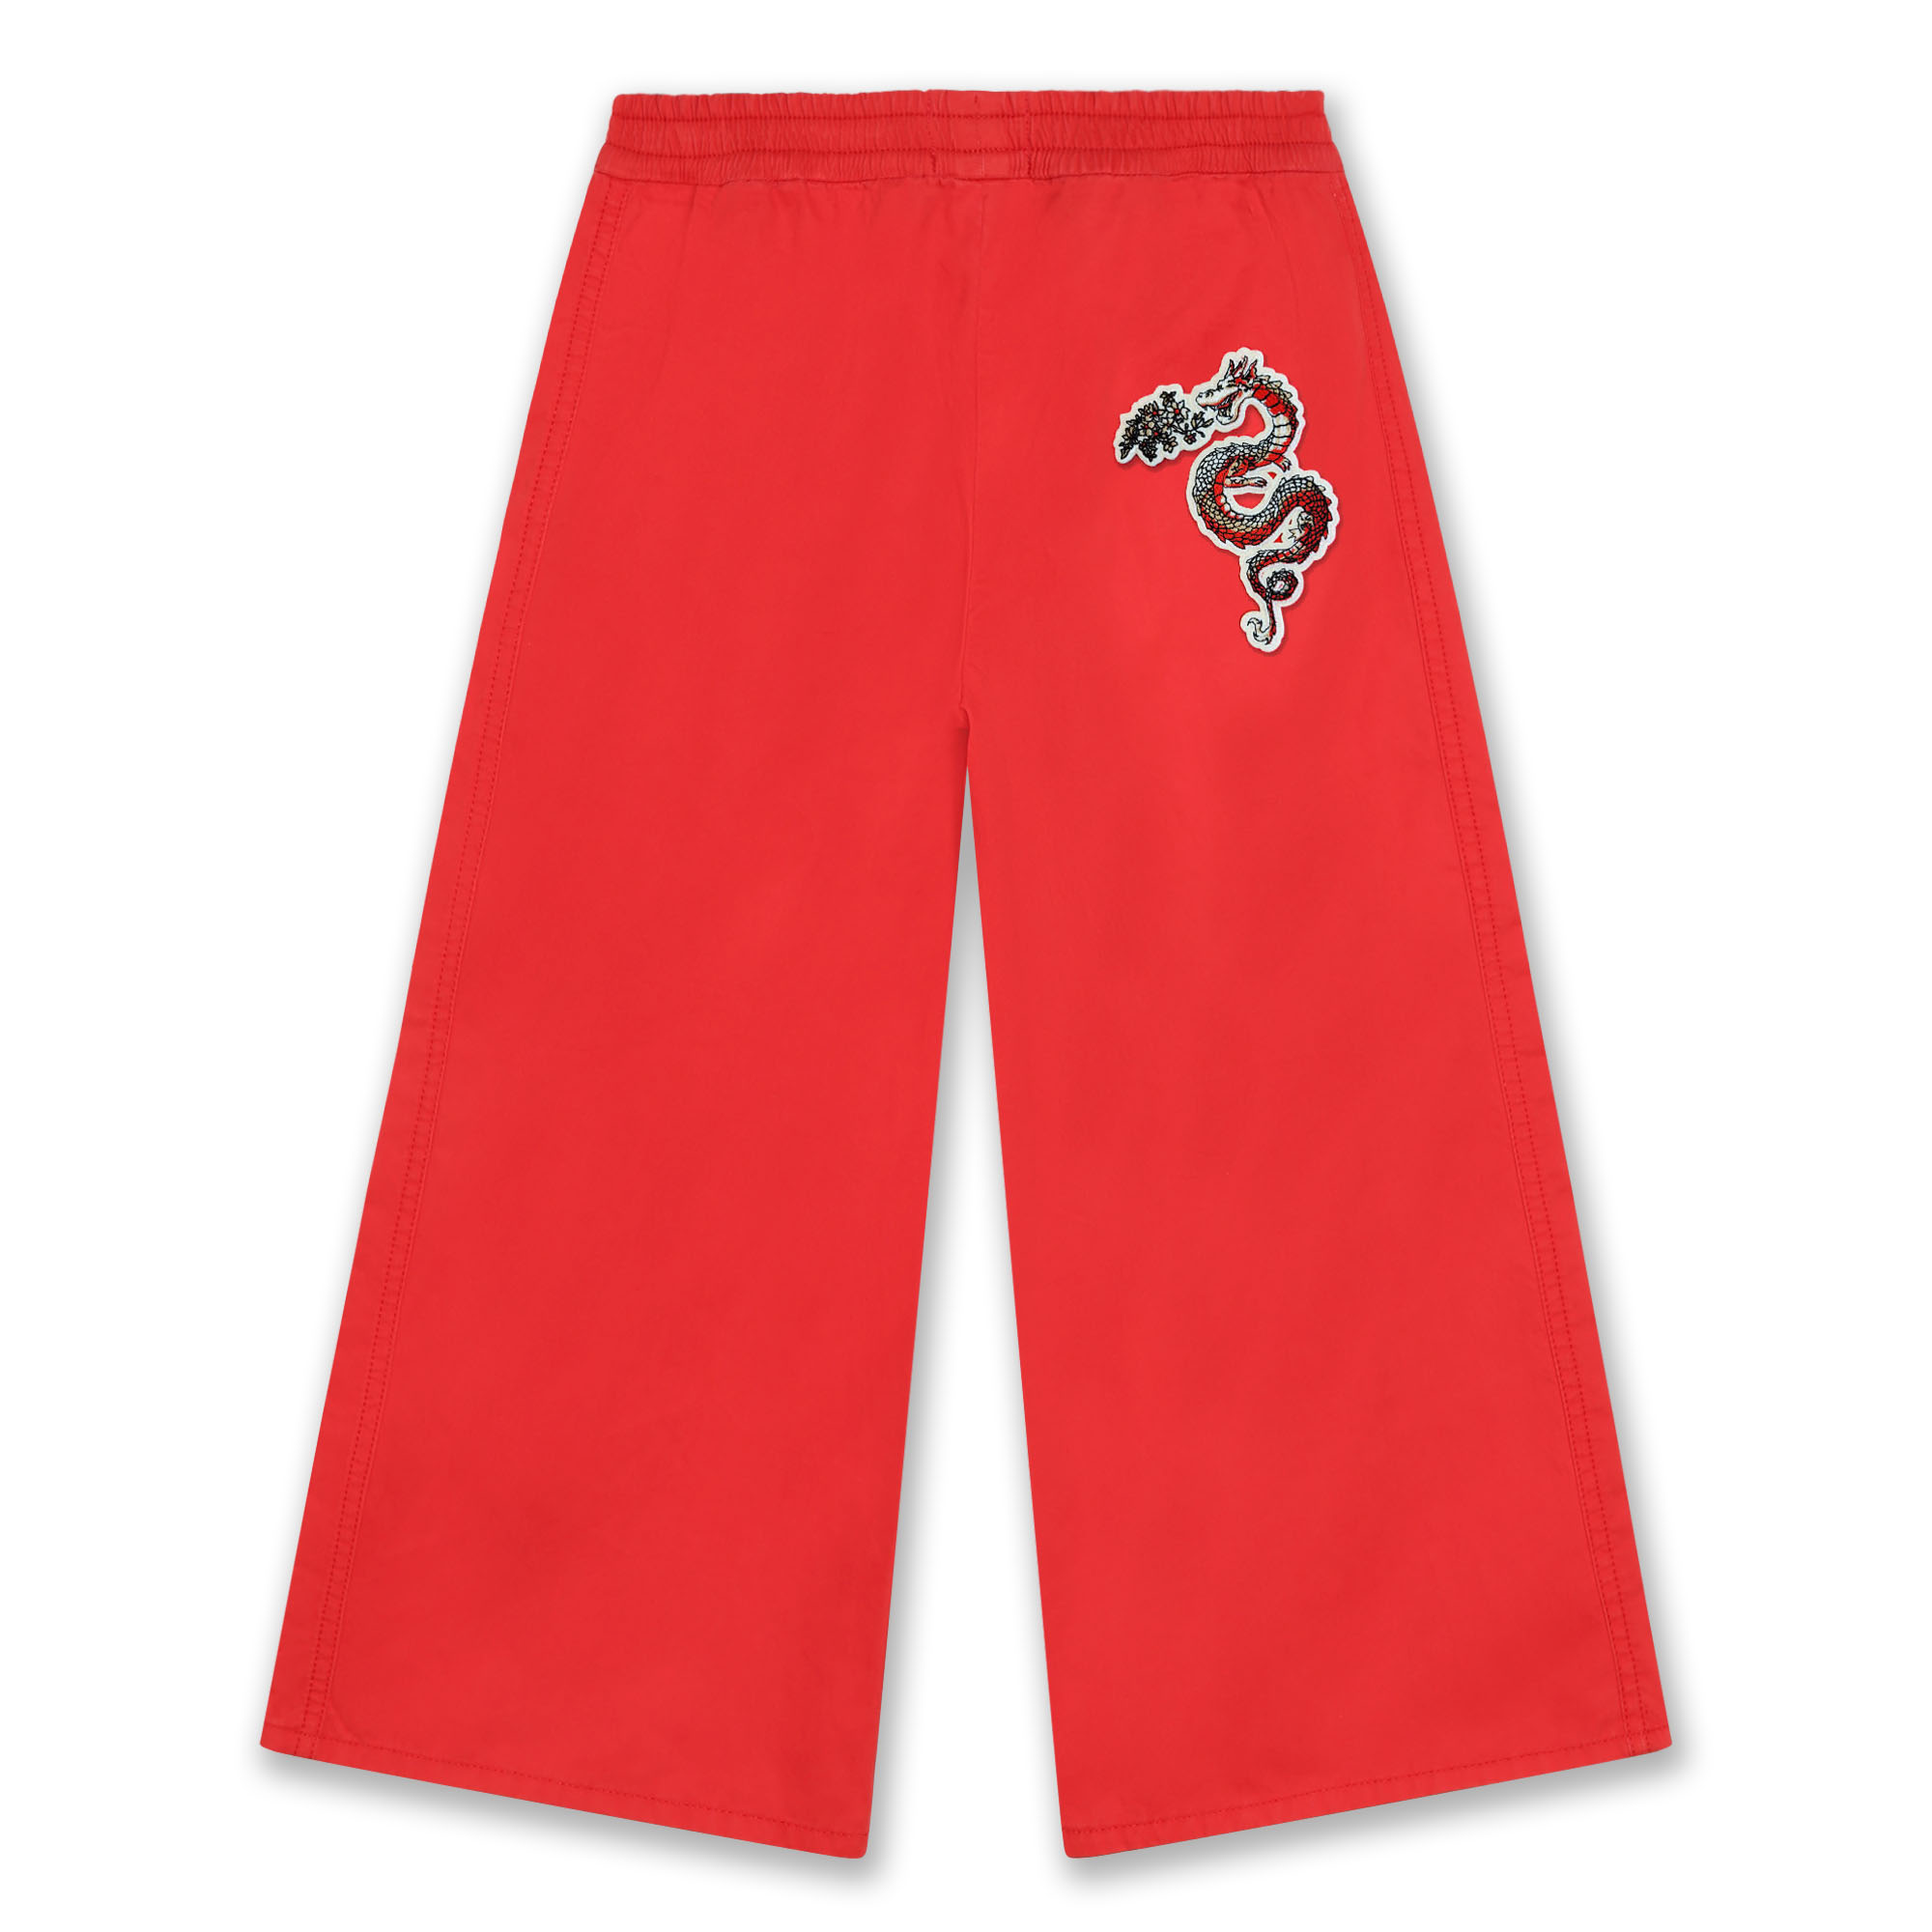 Cotton trousers KENZO KIDS for GIRL